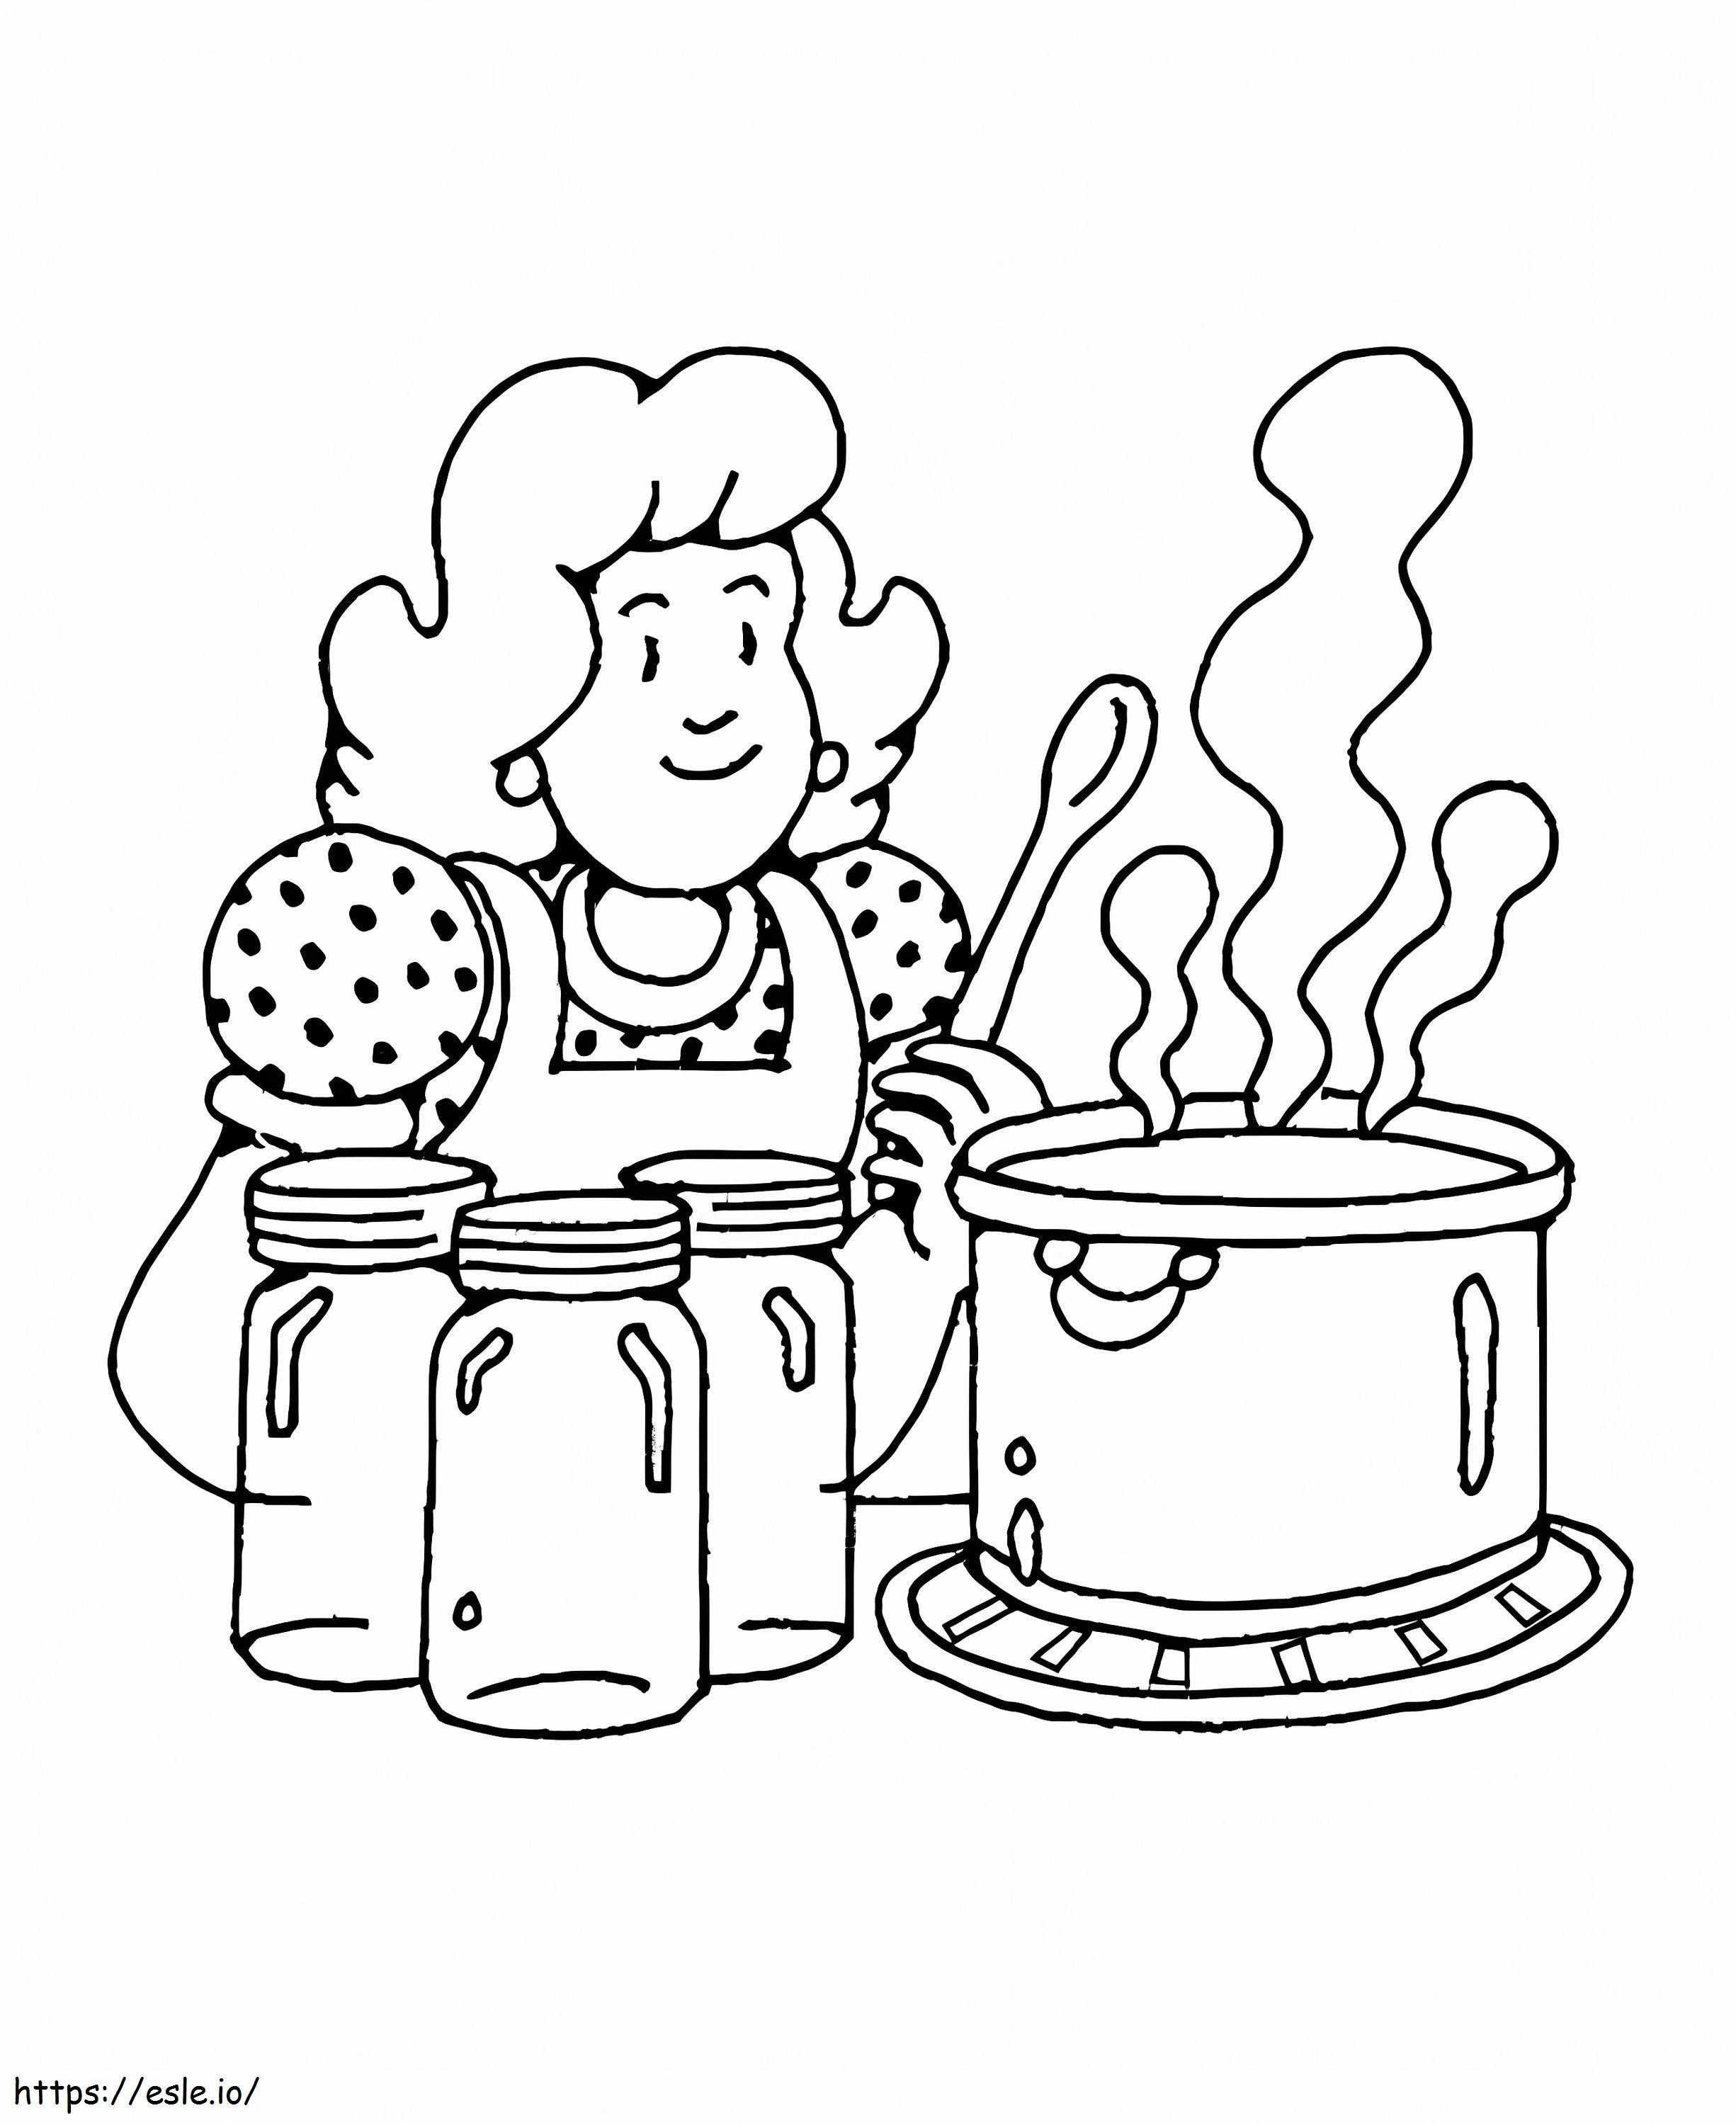 Girl Cooking In The Kitchen coloring page